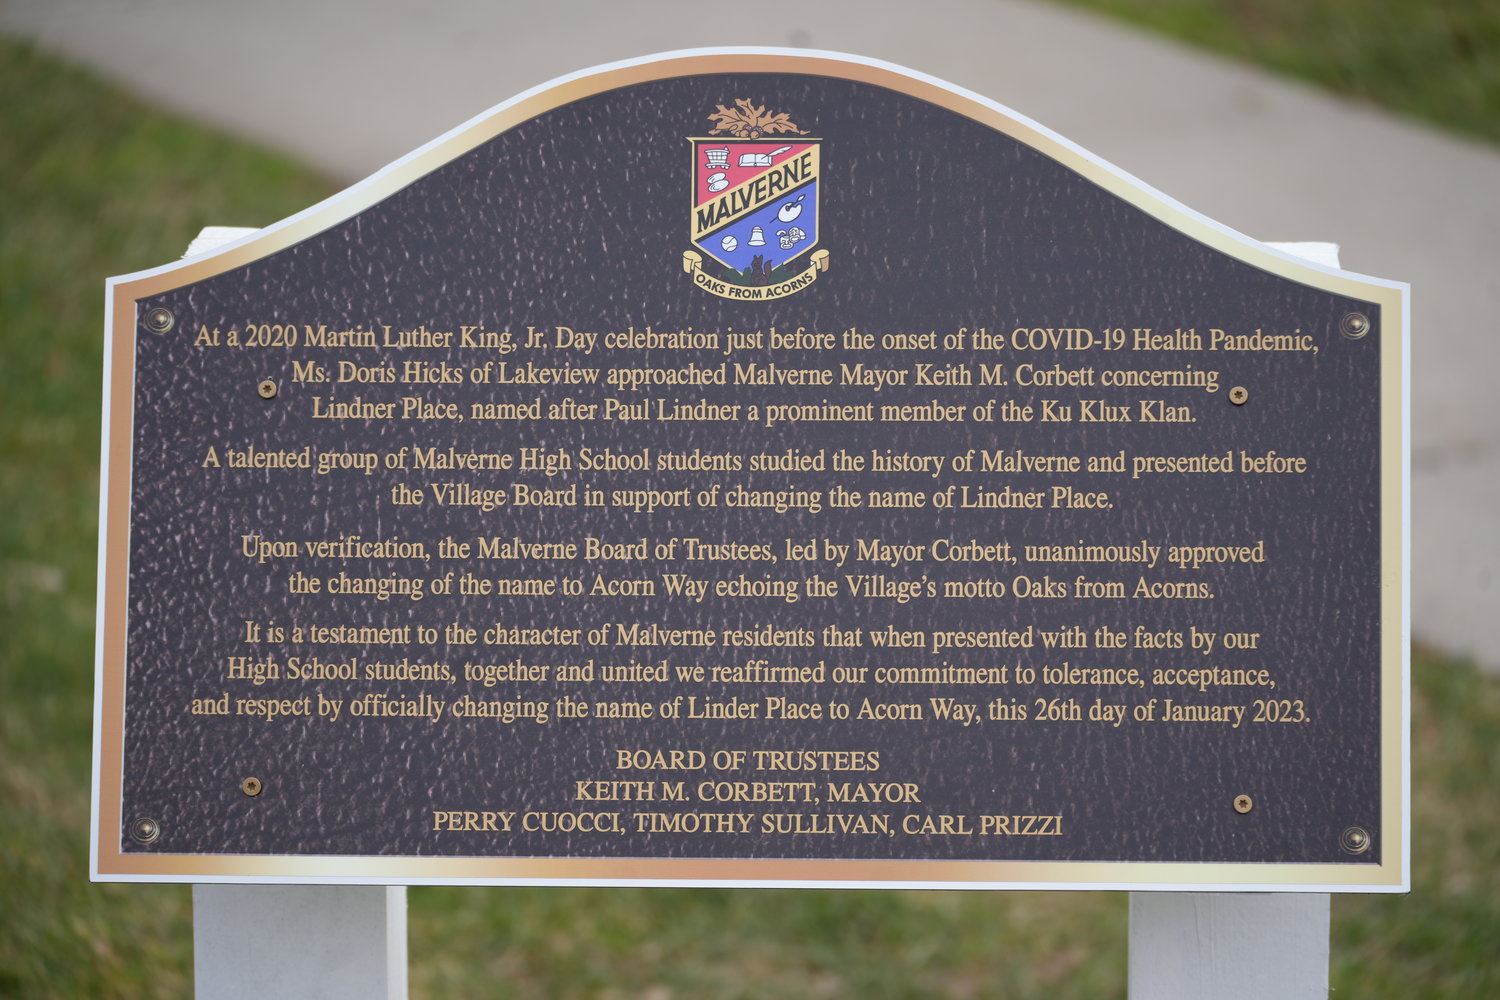 The plaque outside the library explains the history of the street renaming process.